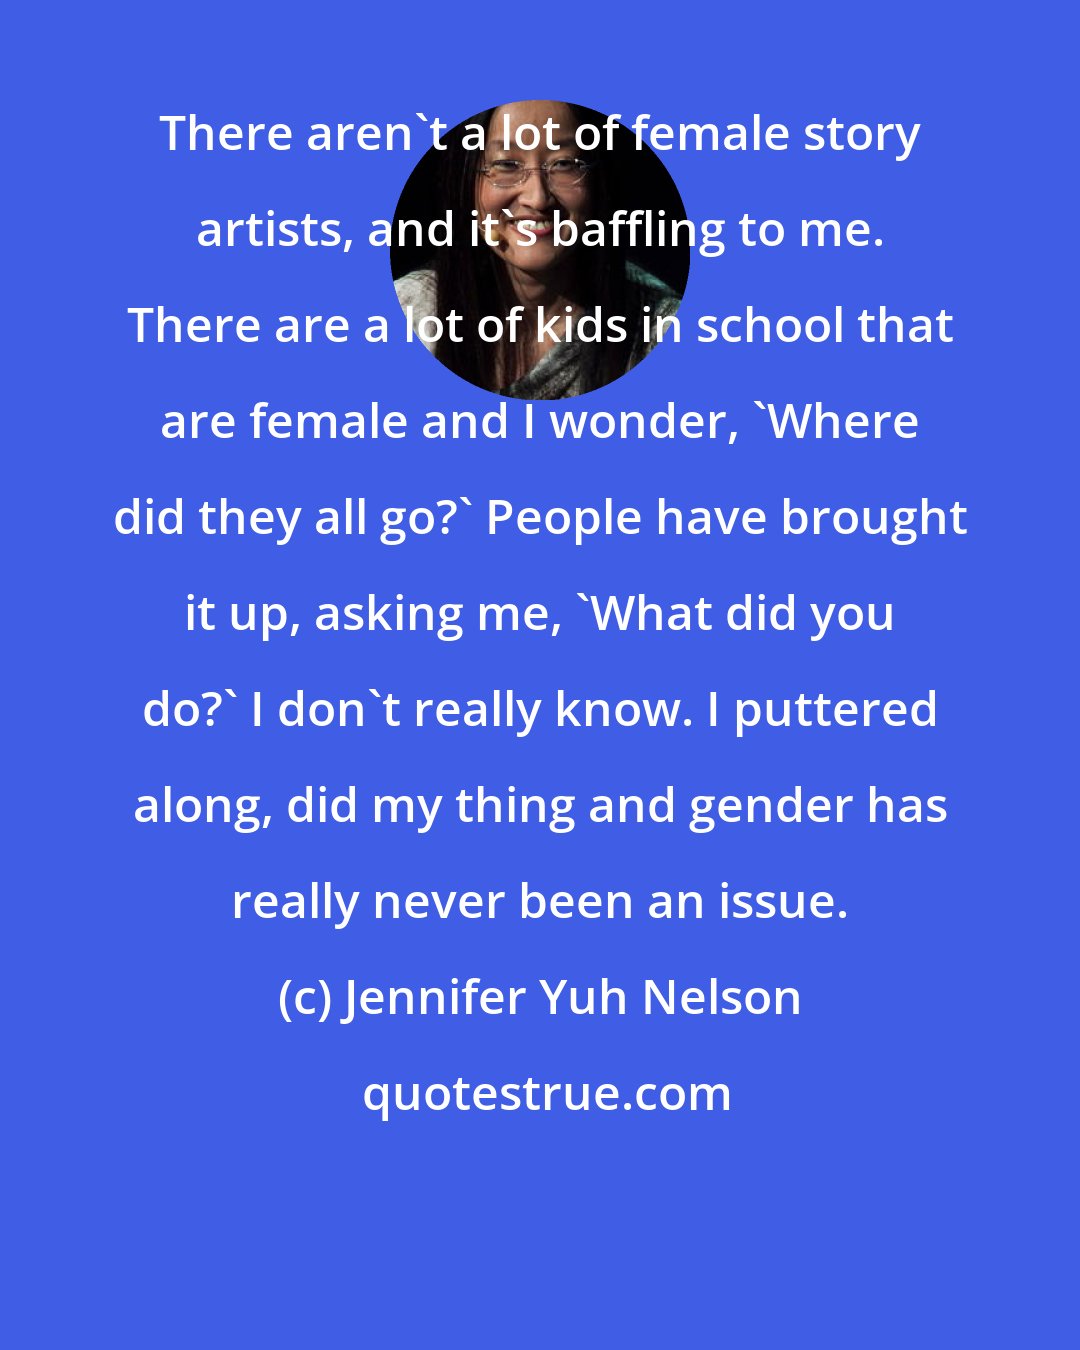 Jennifer Yuh Nelson: There aren't a lot of female story artists, and it's baffling to me. There are a lot of kids in school that are female and I wonder, 'Where did they all go?' People have brought it up, asking me, 'What did you do?' I don't really know. I puttered along, did my thing and gender has really never been an issue.